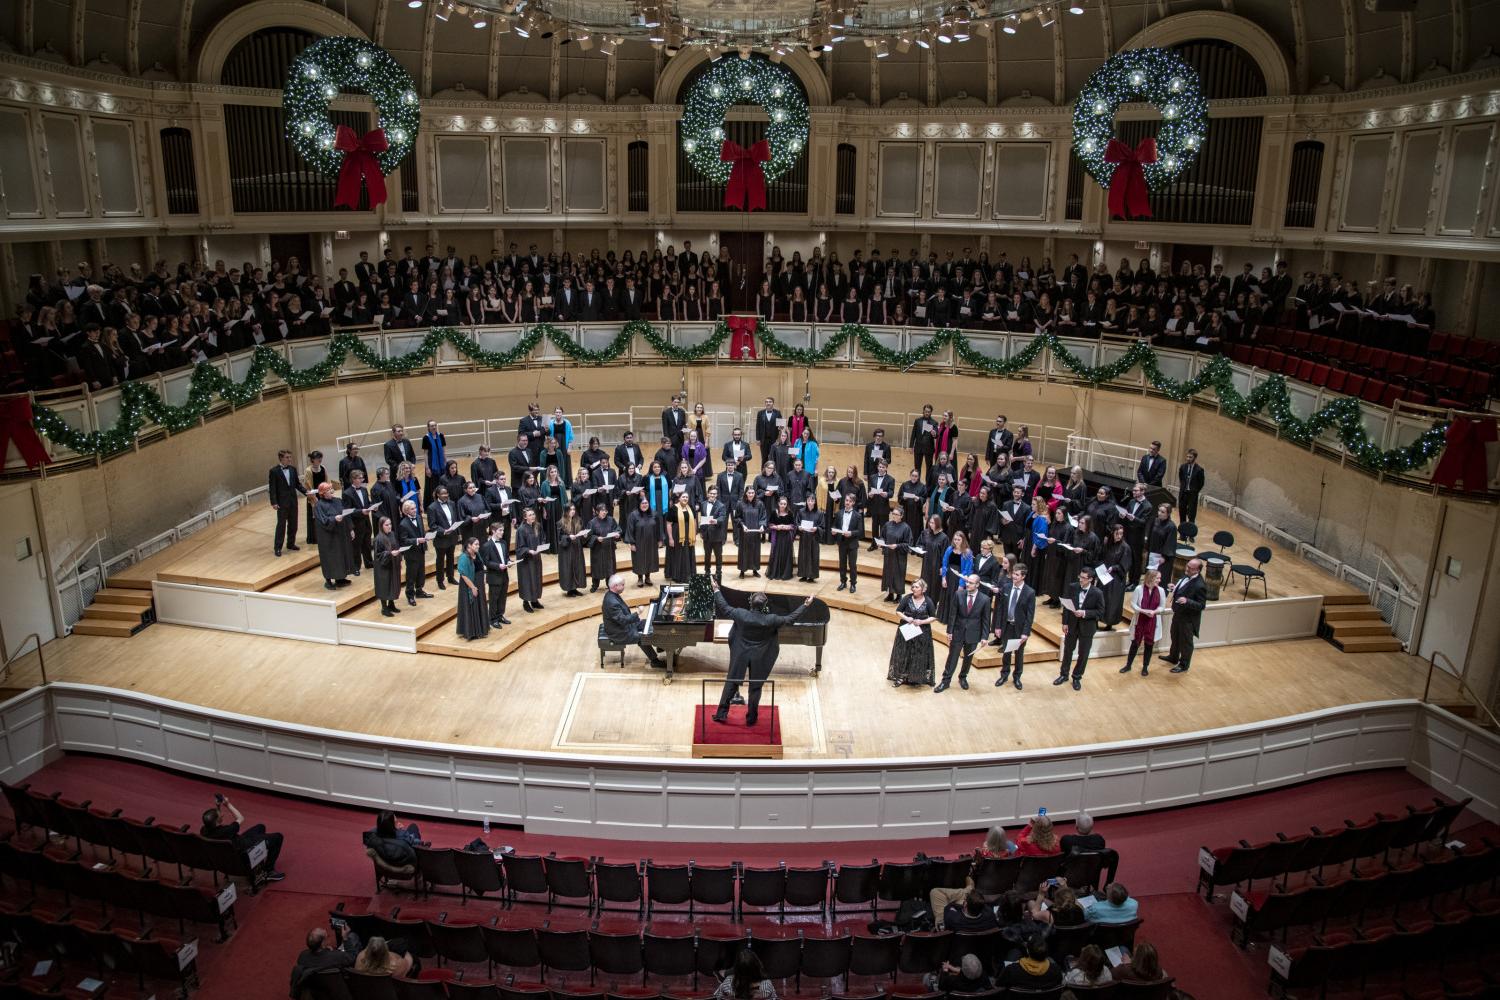 The <a href='http://62.m-y-c.net'>bv伟德ios下载</a> Choir performs in the Chicago Symphony Hall.